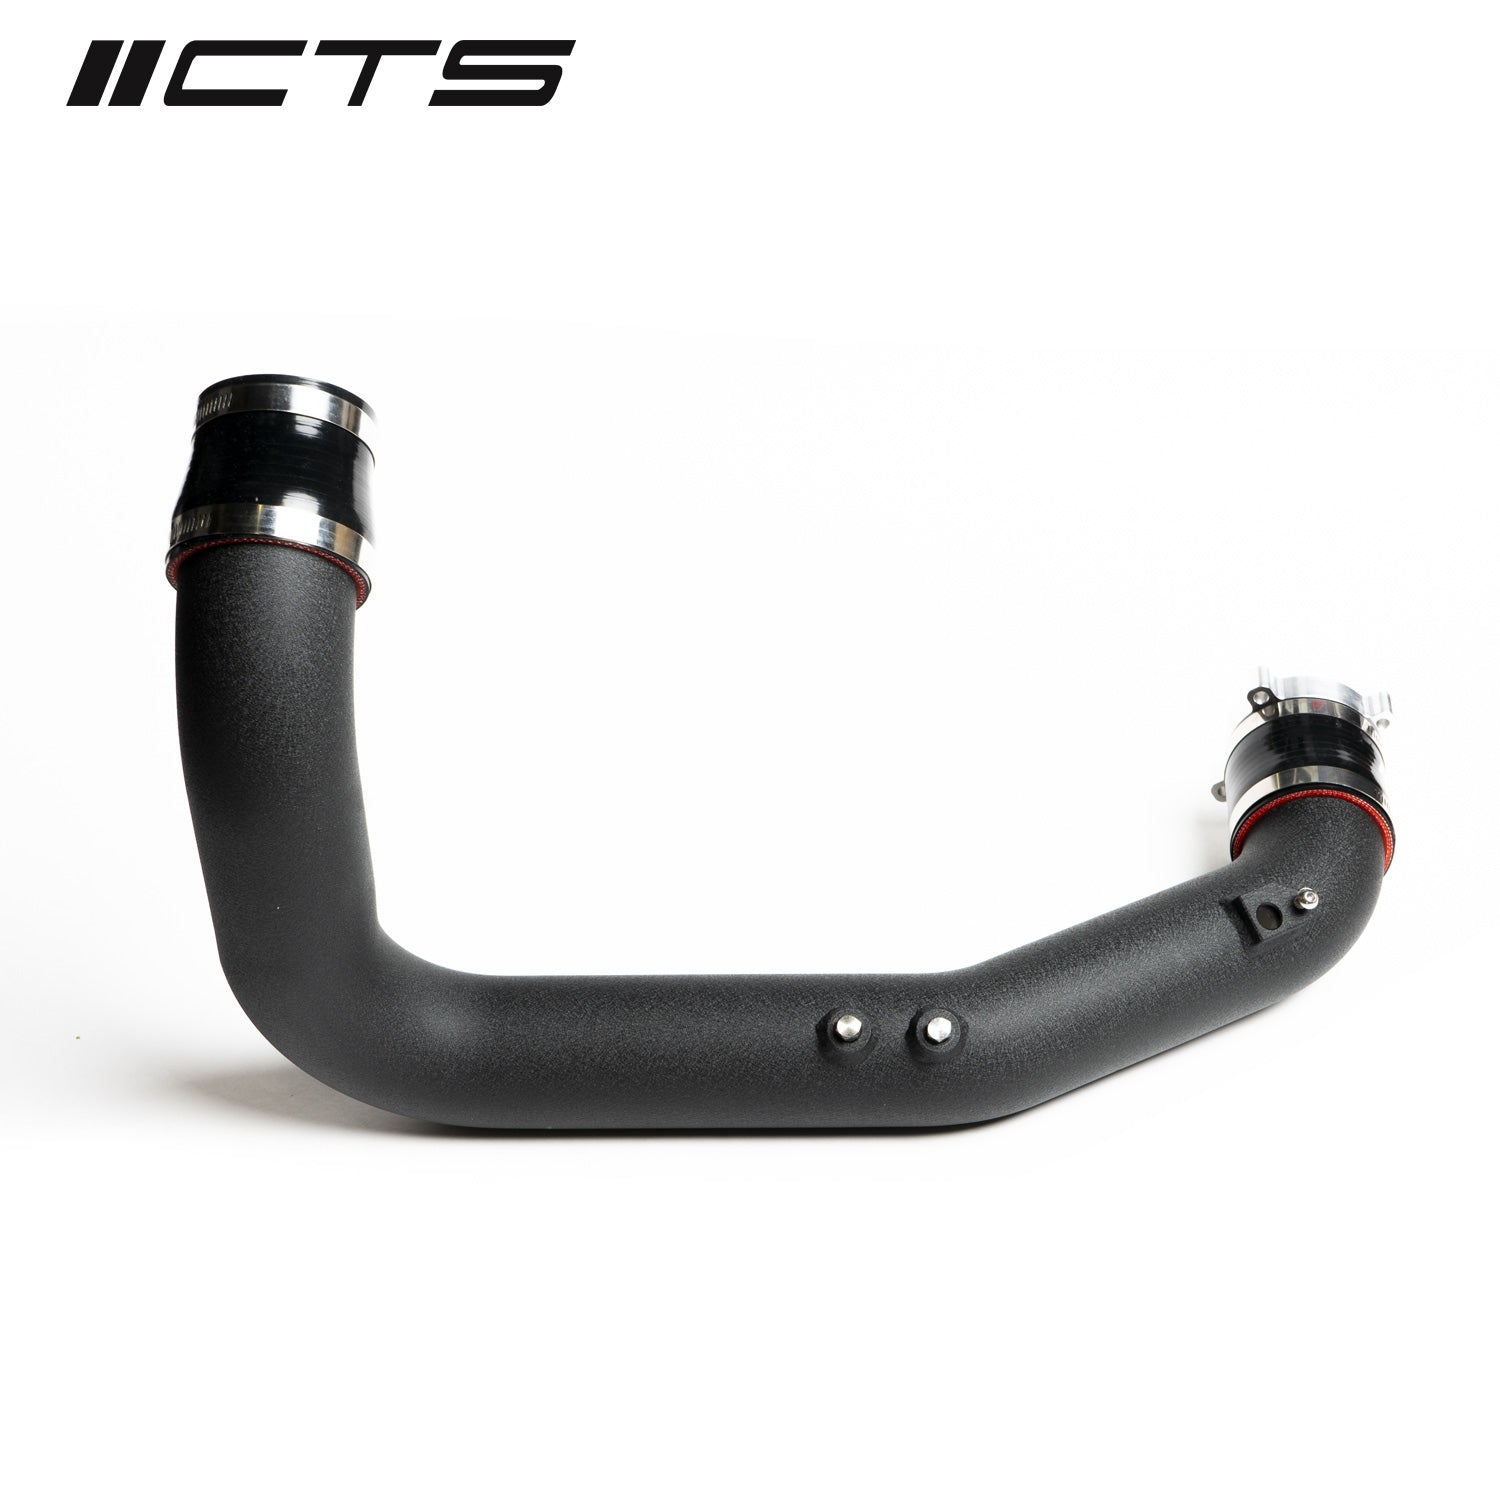 CTS TURBO B9 AUDI S4/S5 3.0T CHARGE PIPE KIT - 0